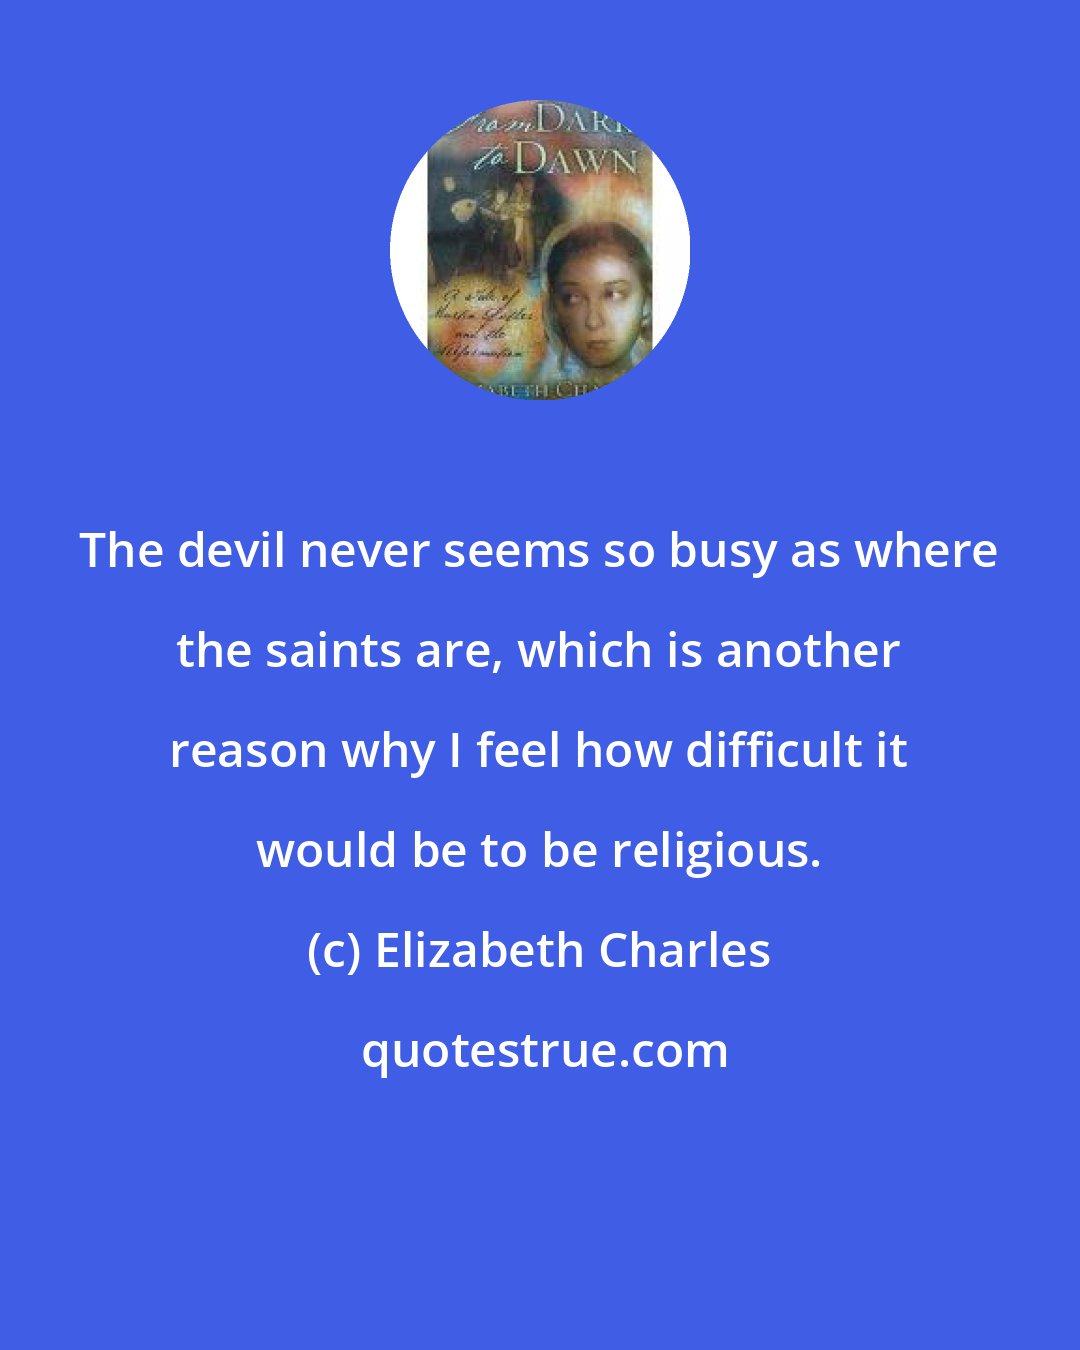 Elizabeth Charles: The devil never seems so busy as where the saints are, which is another reason why I feel how difficult it would be to be religious.